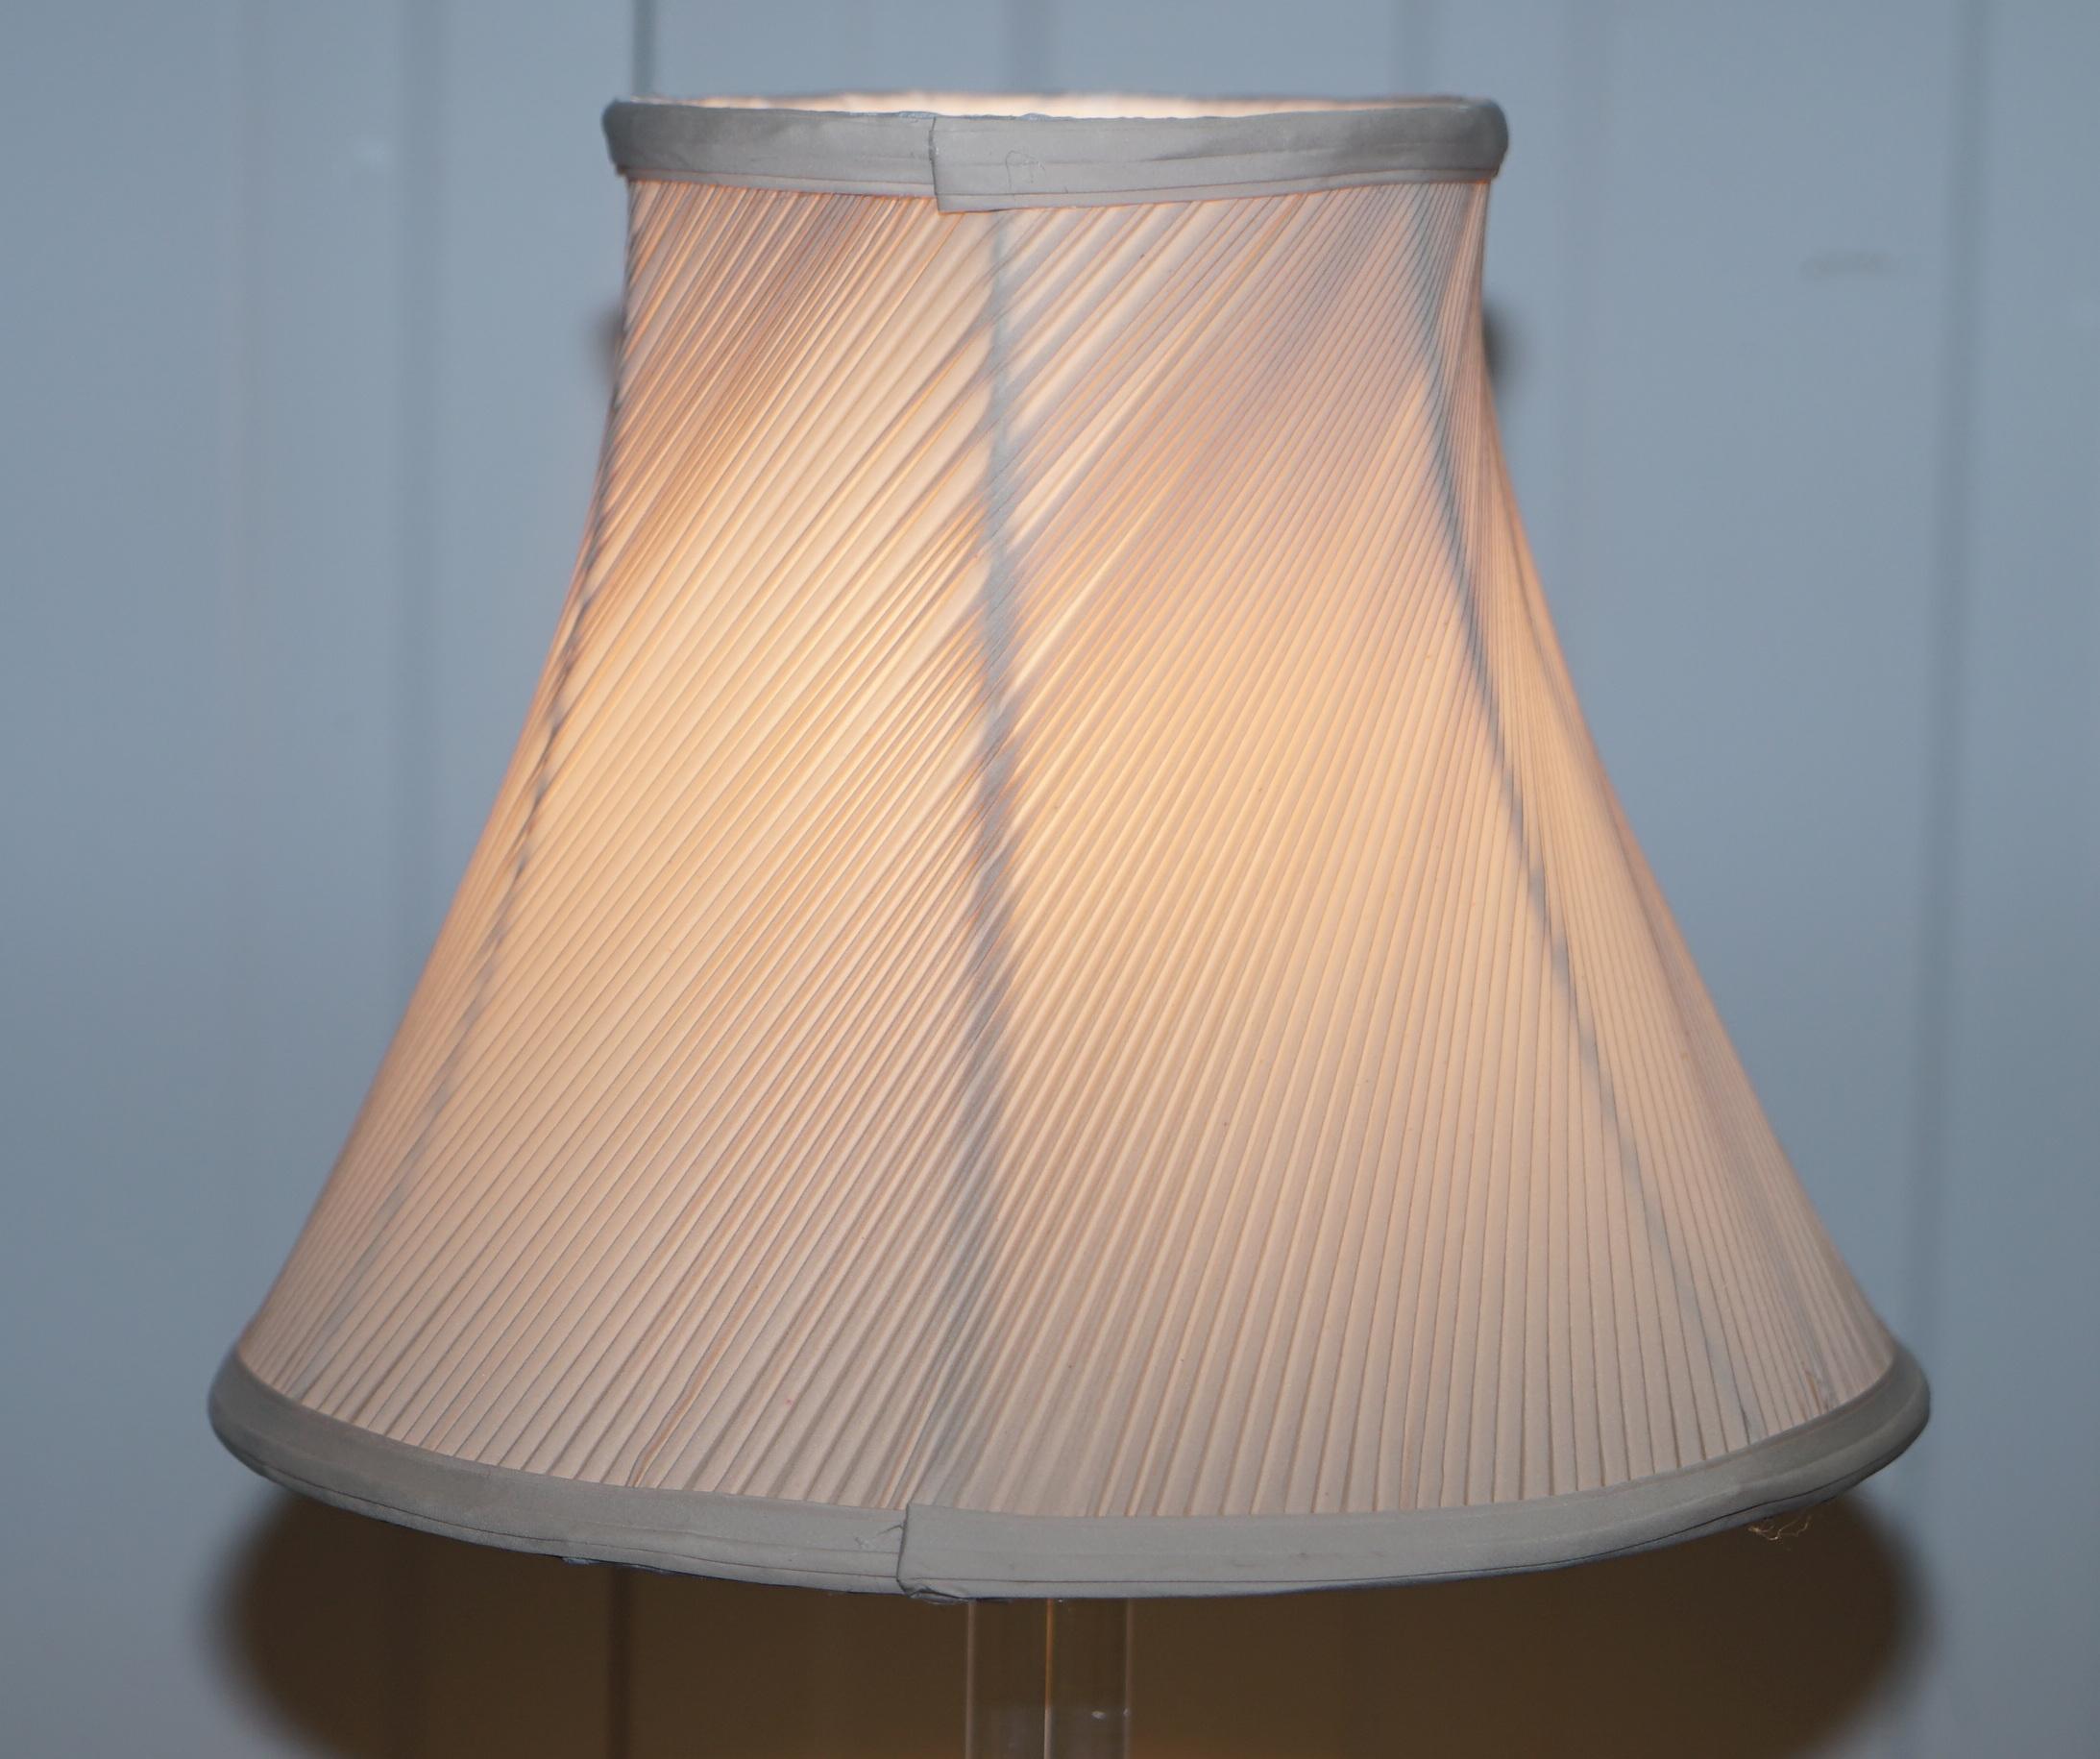 We are delighted to offer for sale this stunning tall solid glass table lamp made by the geniuses at Greenapple

I’m now listing for sale around 20 lamps that all came from the Duke and Duchess of Northumberland’s estate sale, each piece is